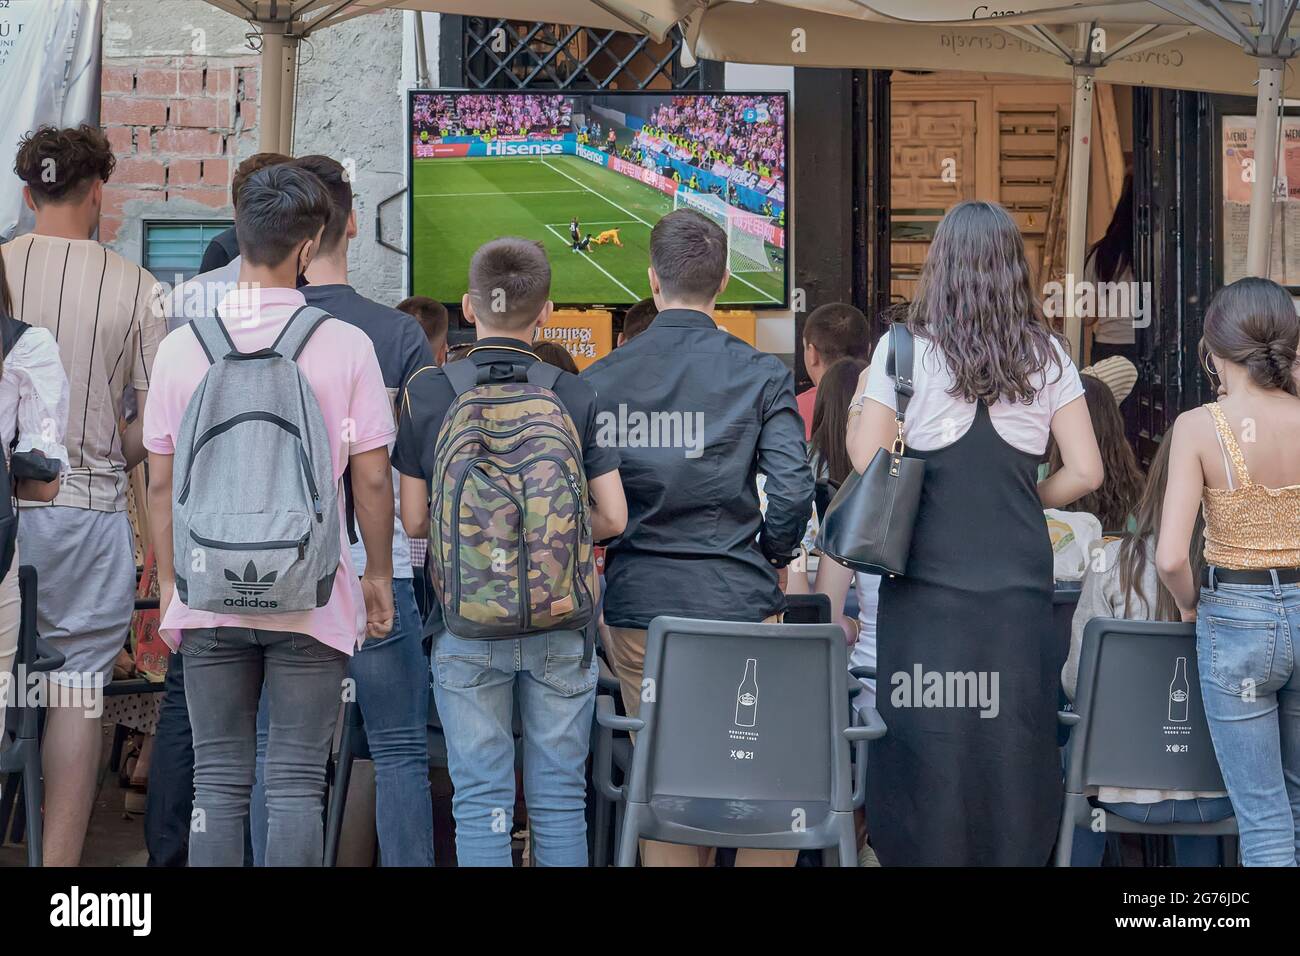 group of young boys and girls watching a soccer game on television on the terrace of a bar in the main square of the city of Cuenca, Spain, Europe Stock Photo